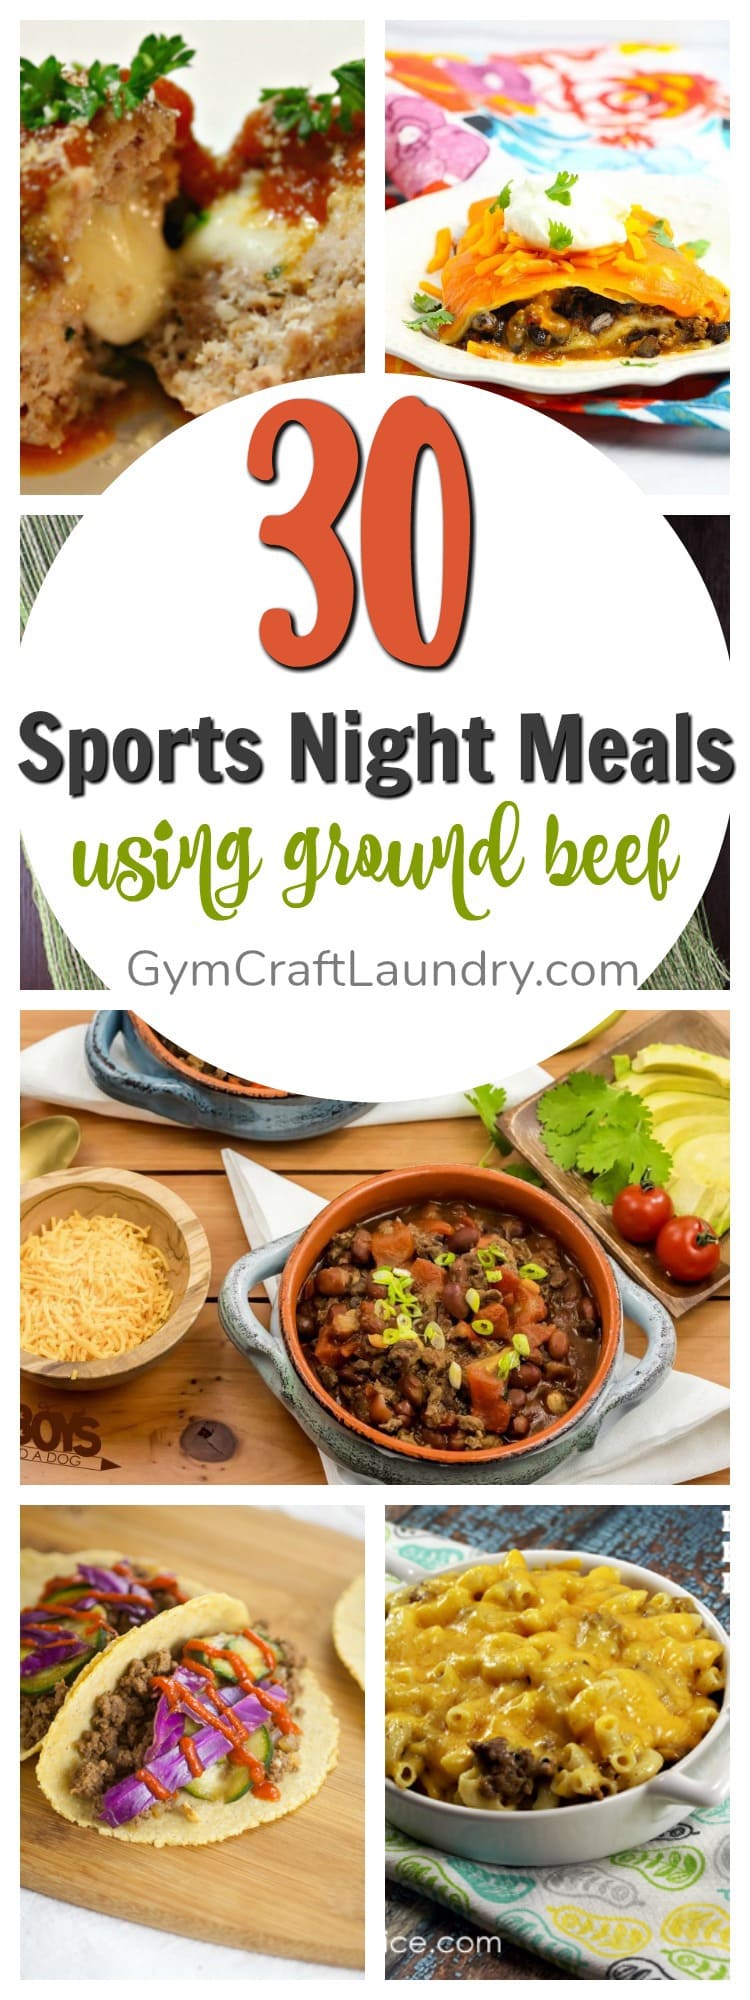 30 Sports Night Meal Ideas with Ground Beef